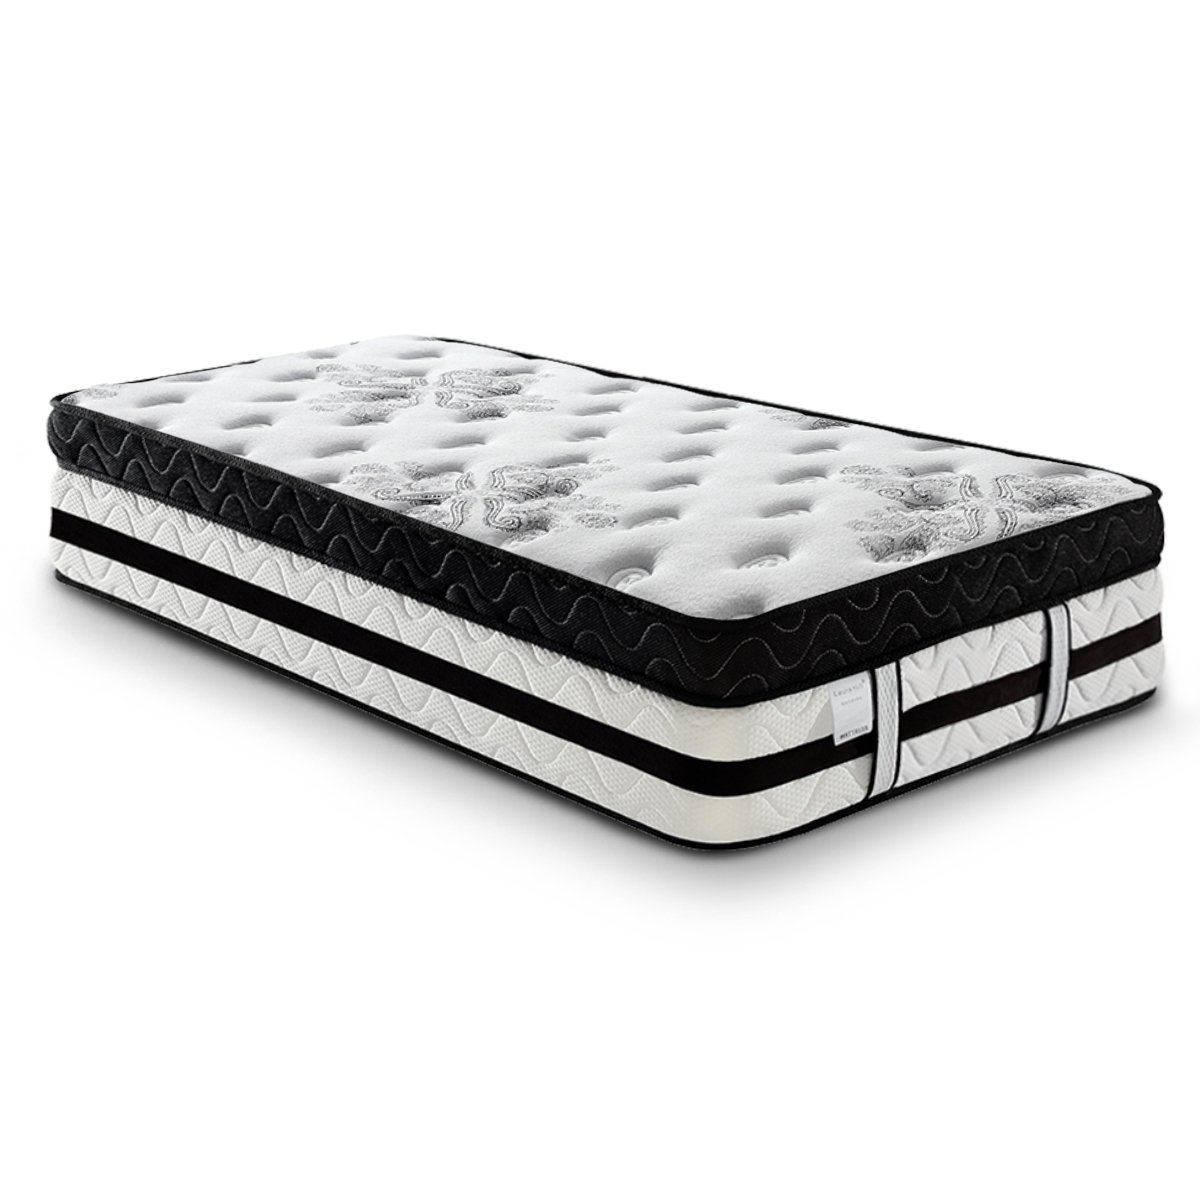 Laura Hill Single Mattress with Euro Top - 34cm 2